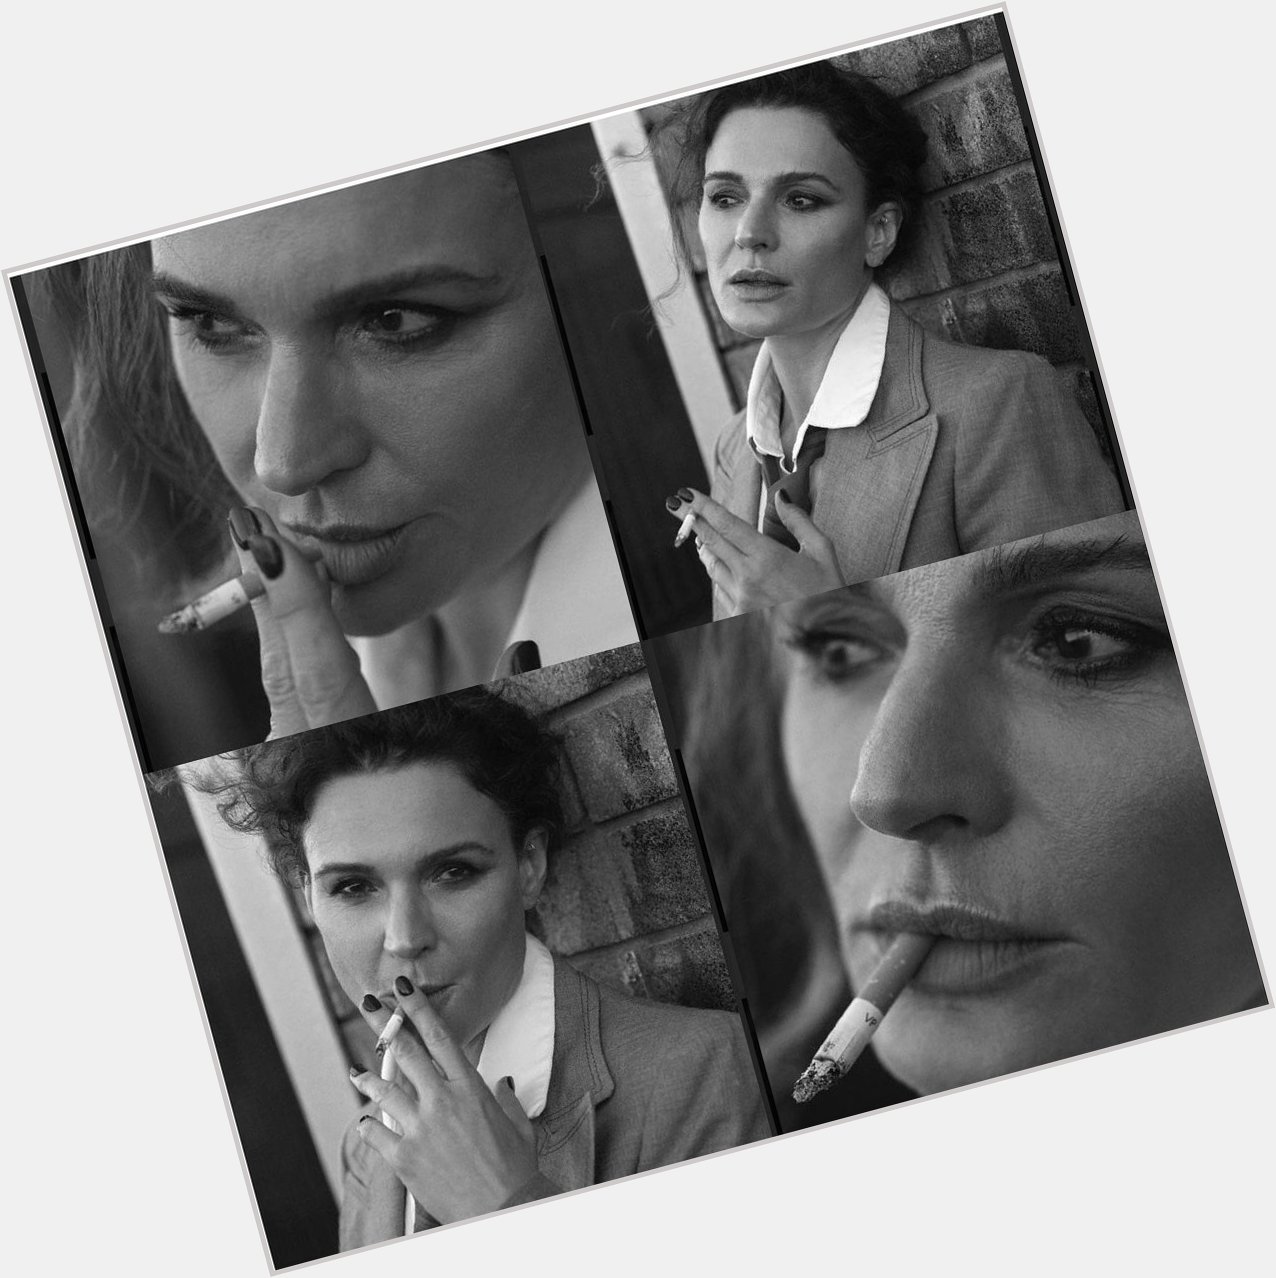 HAPPY BIRTHDAY TO THE ONE AND ONLY DANIELLE CORMACK<3<3<3 